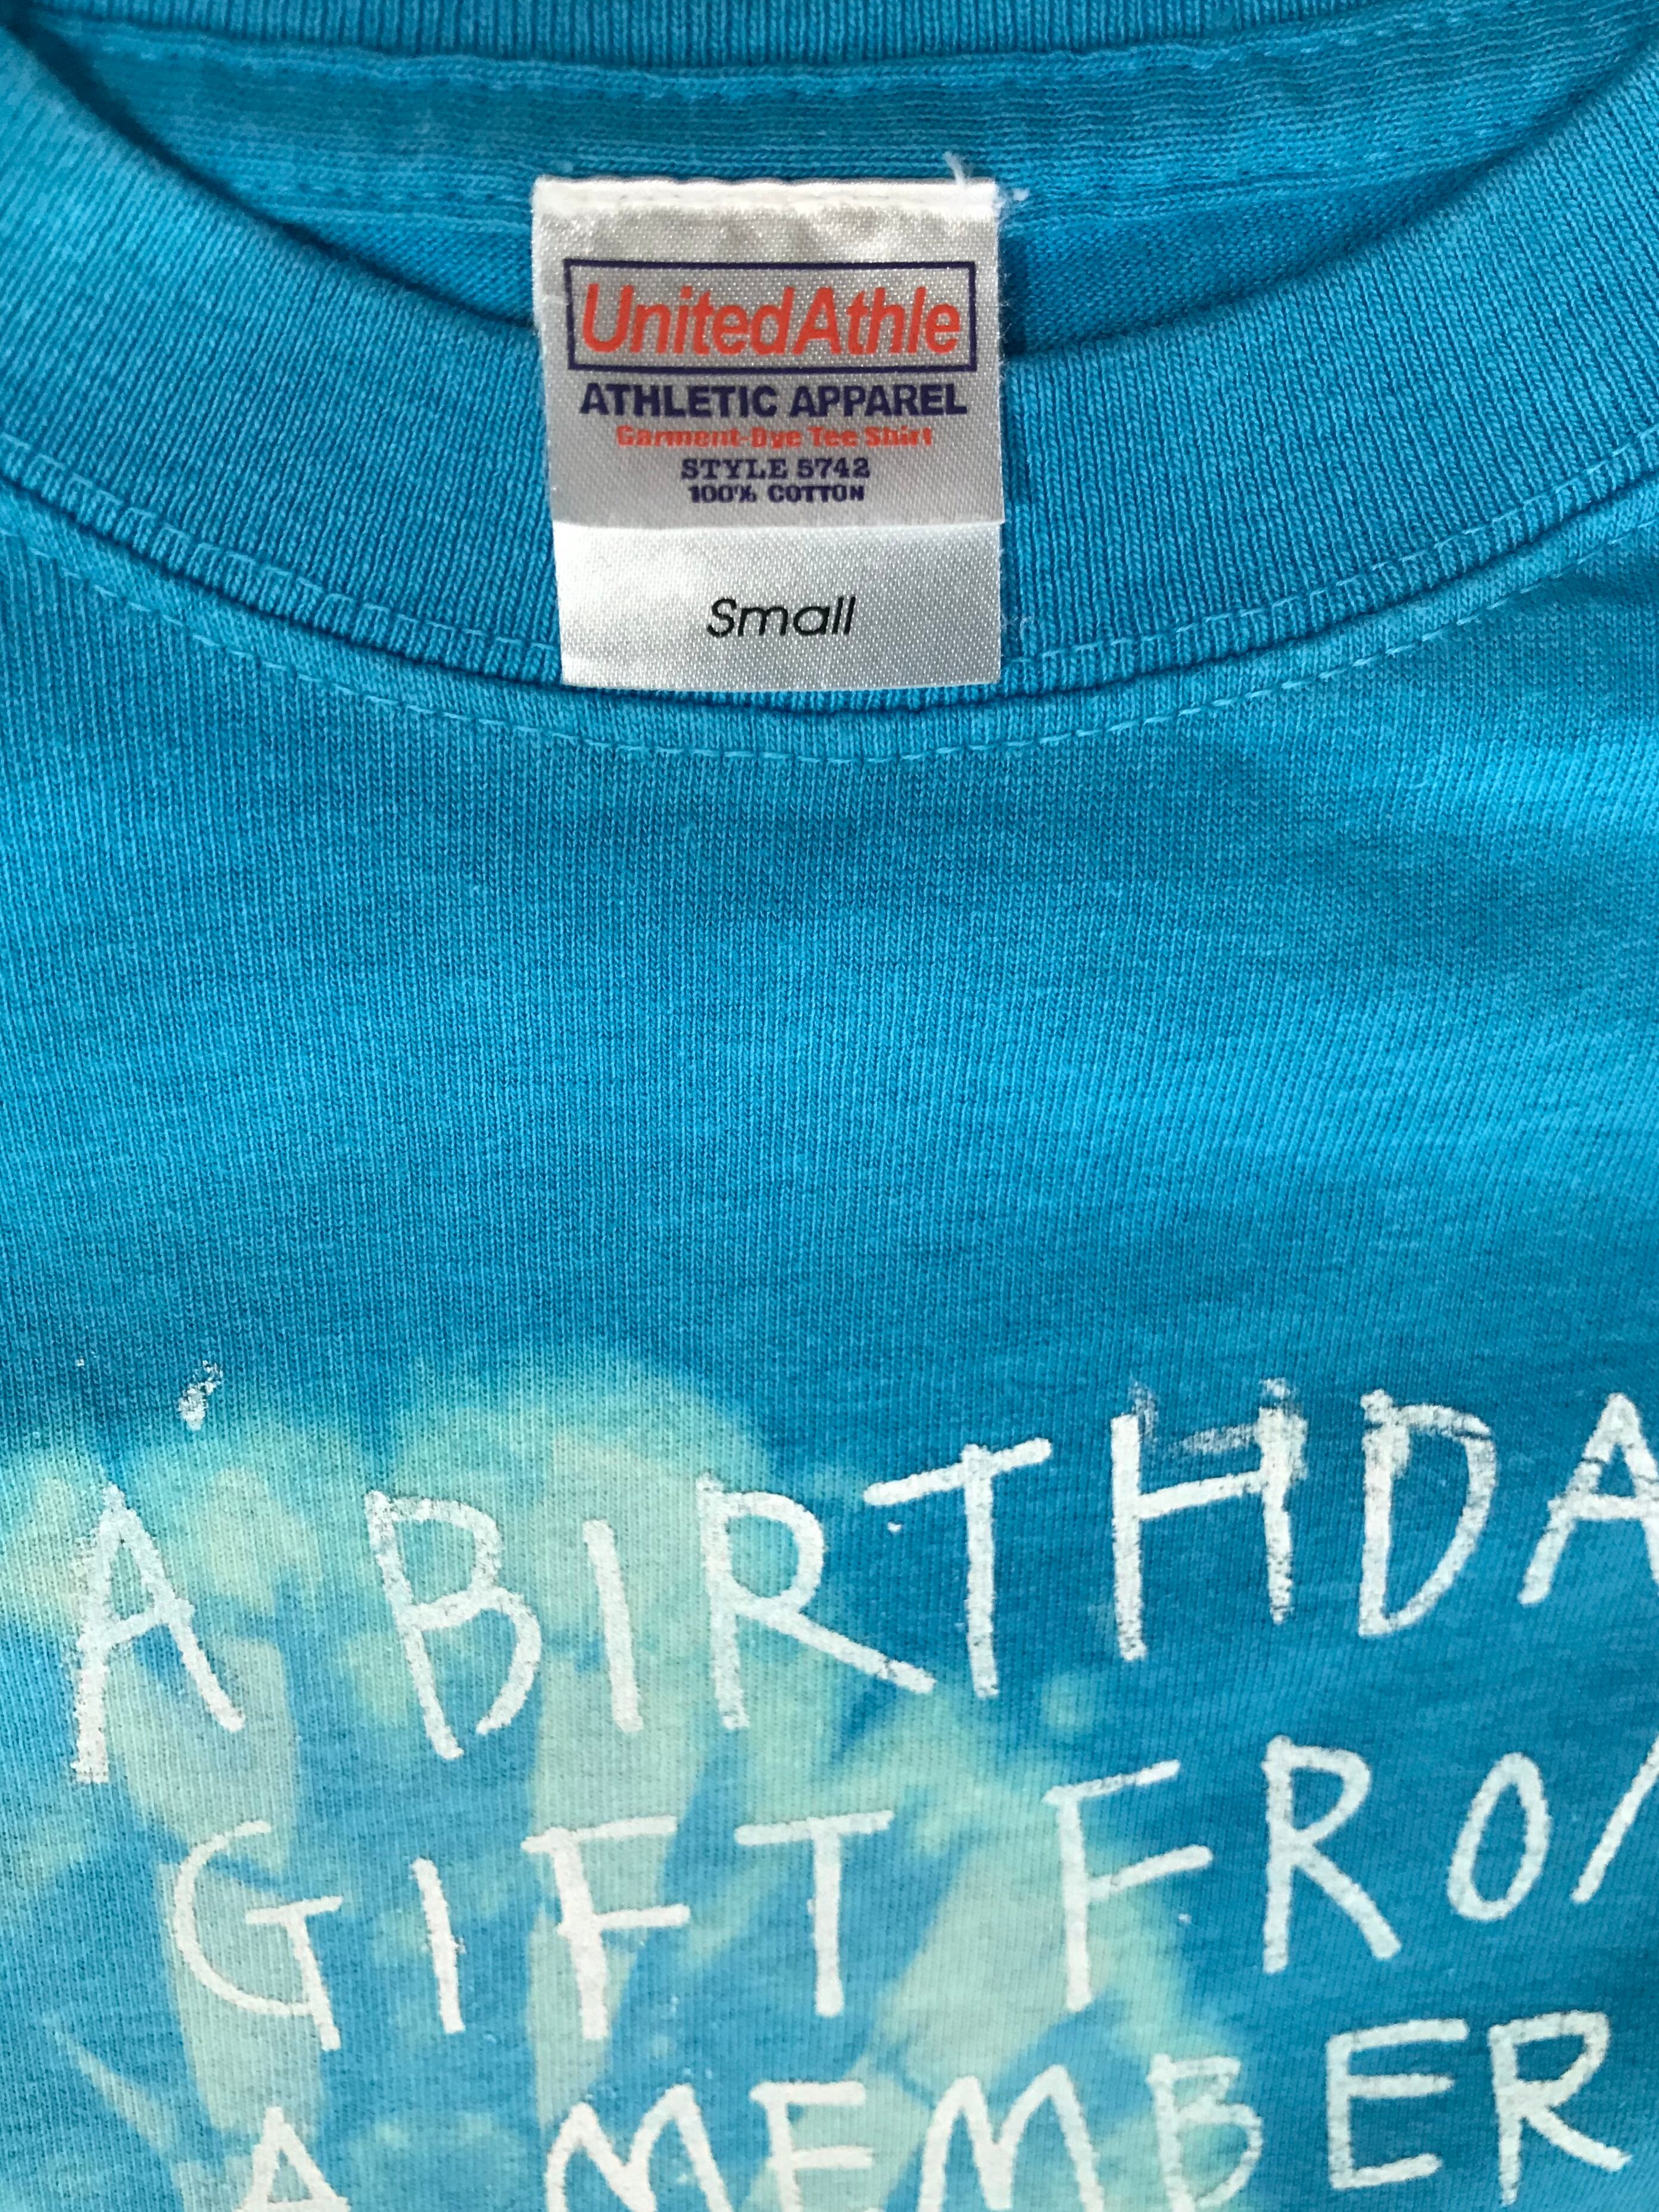 birthday gift tシャツ 絞り | campK earth store